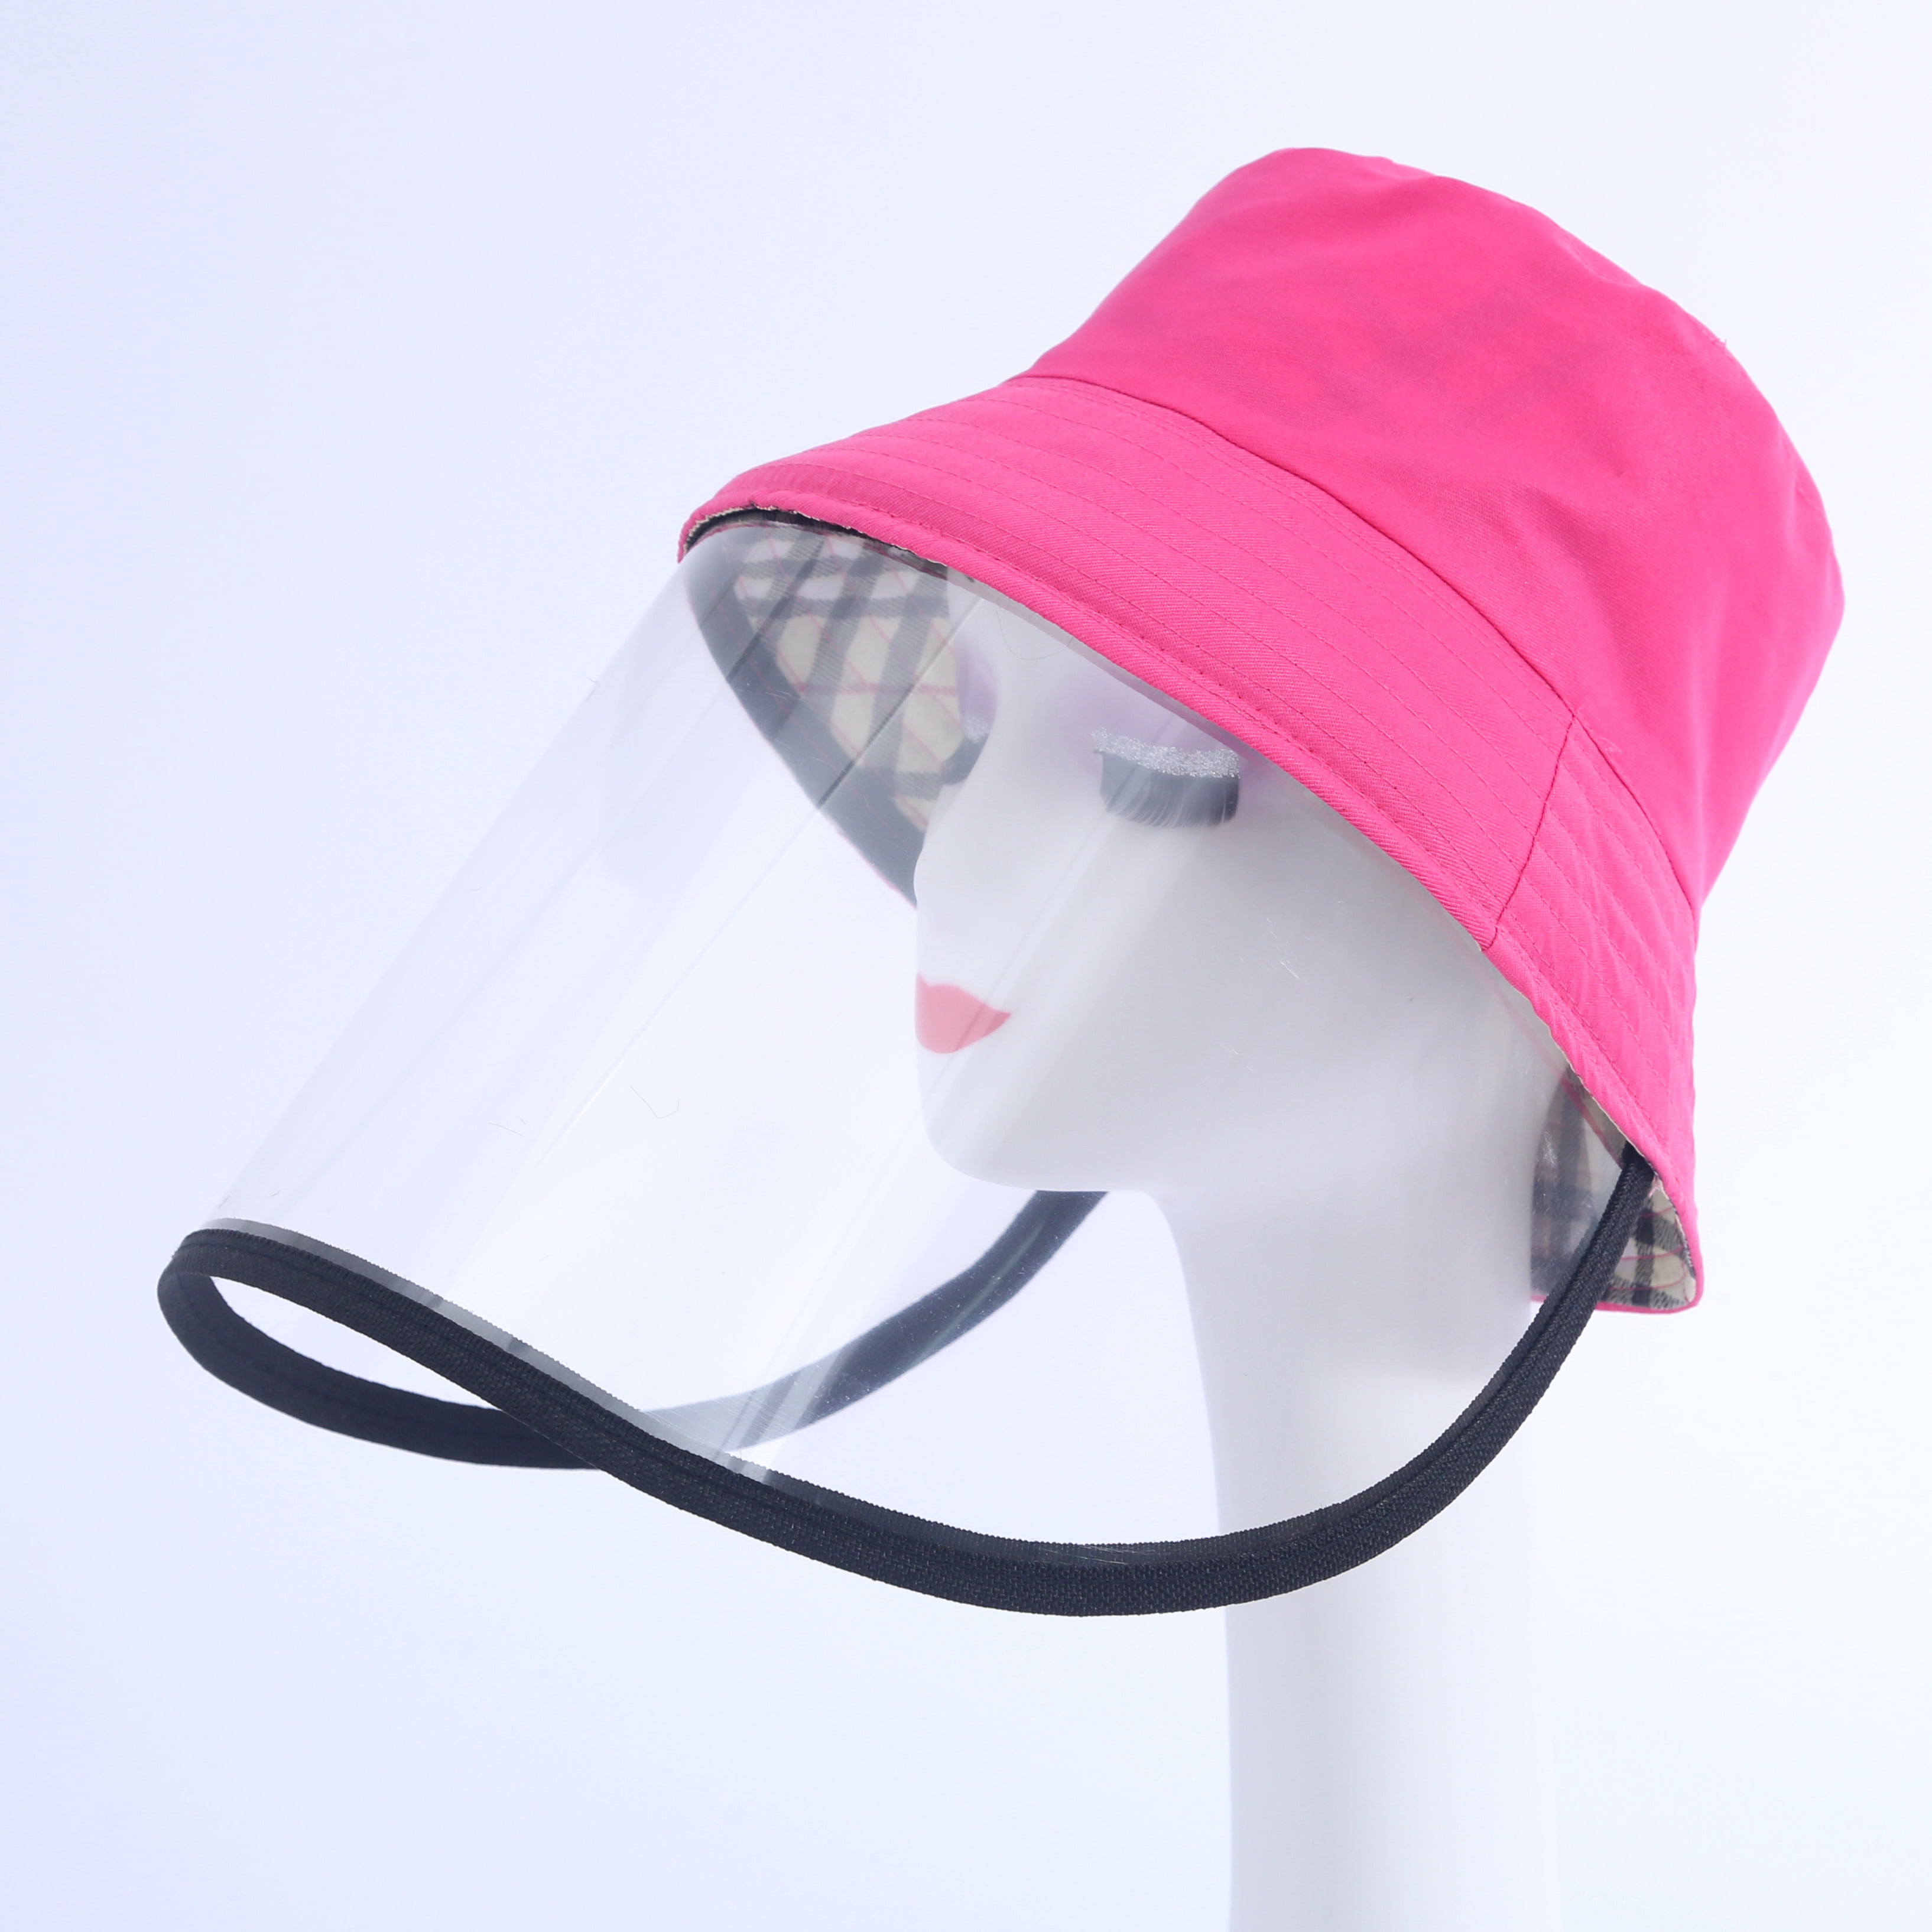 Reversible Bucket Hat for Women Outdoor Fisherman Hat with Removable Dustproof Cover Protective Hats